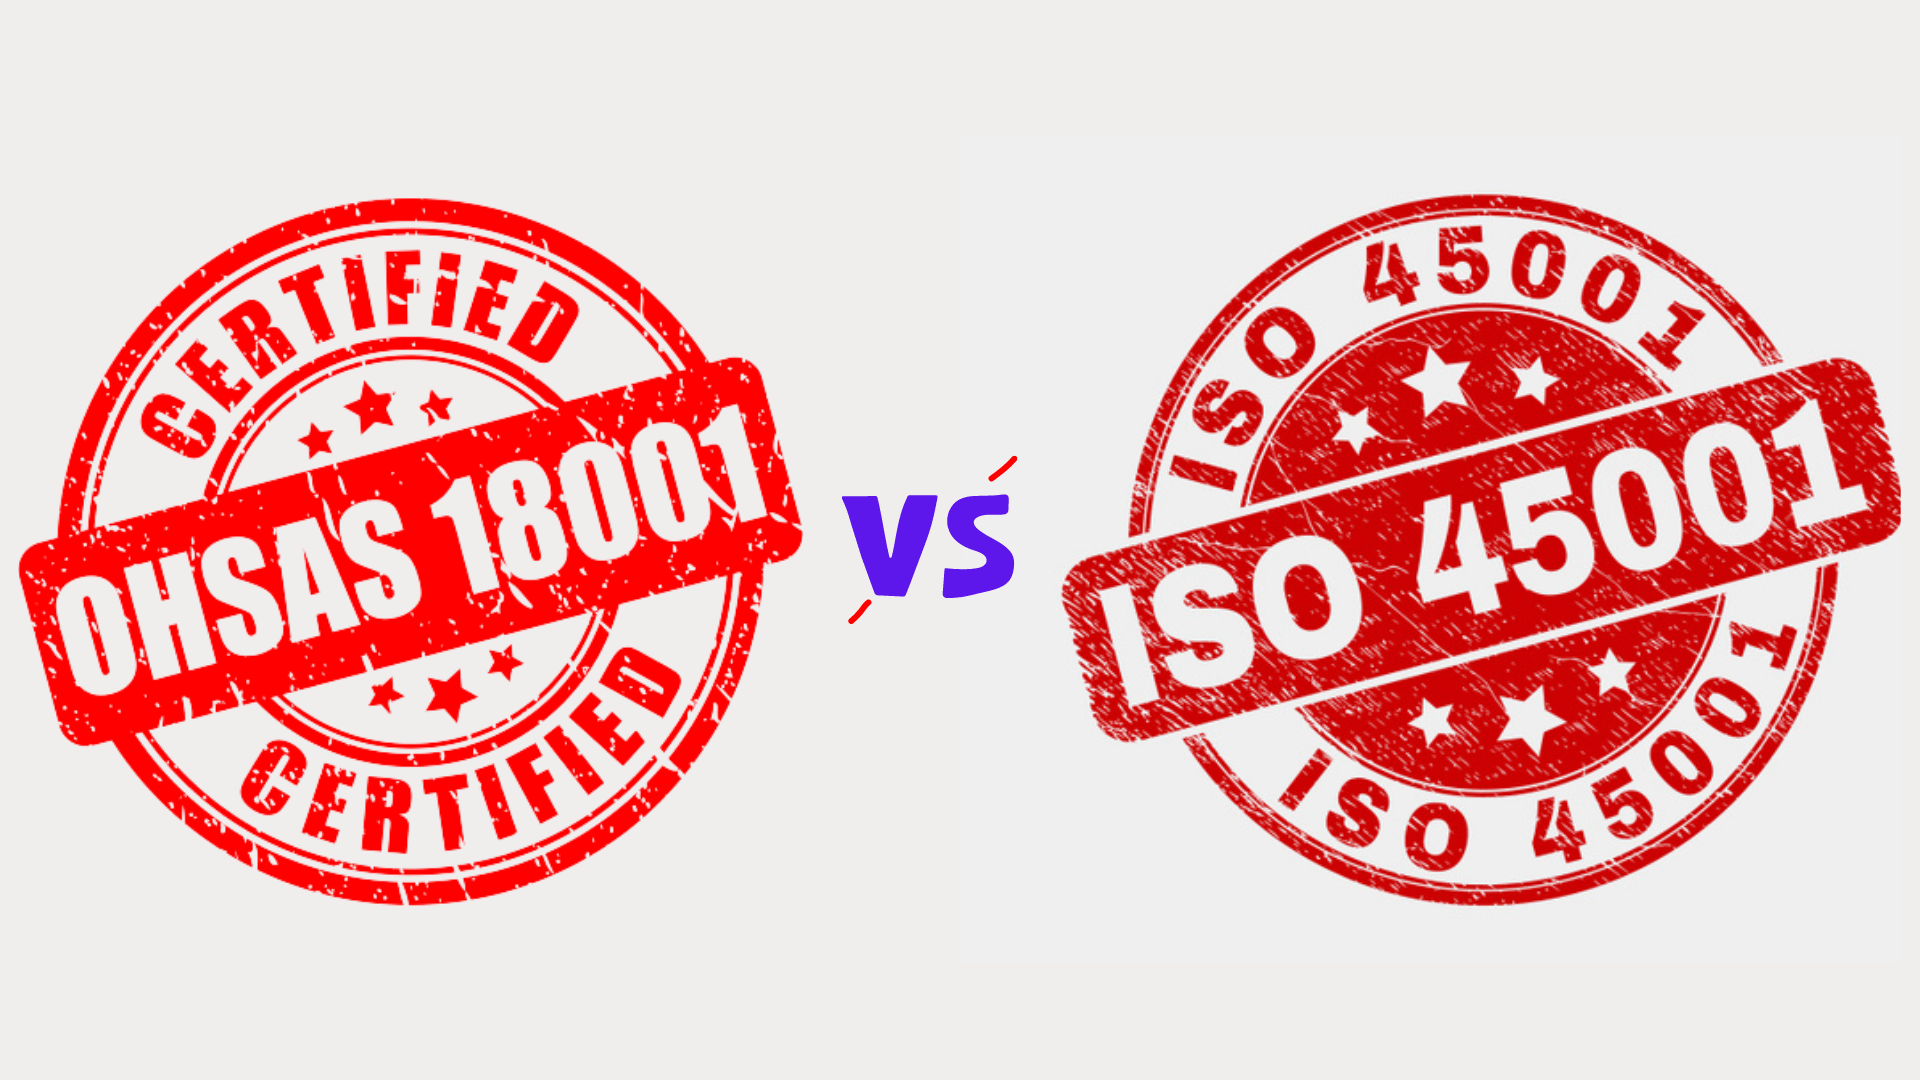 iso 45001 vs ohsas 18001,
compare ohsas 18001 and iso 45001, OHSAS 18001 vs ISO 45001
